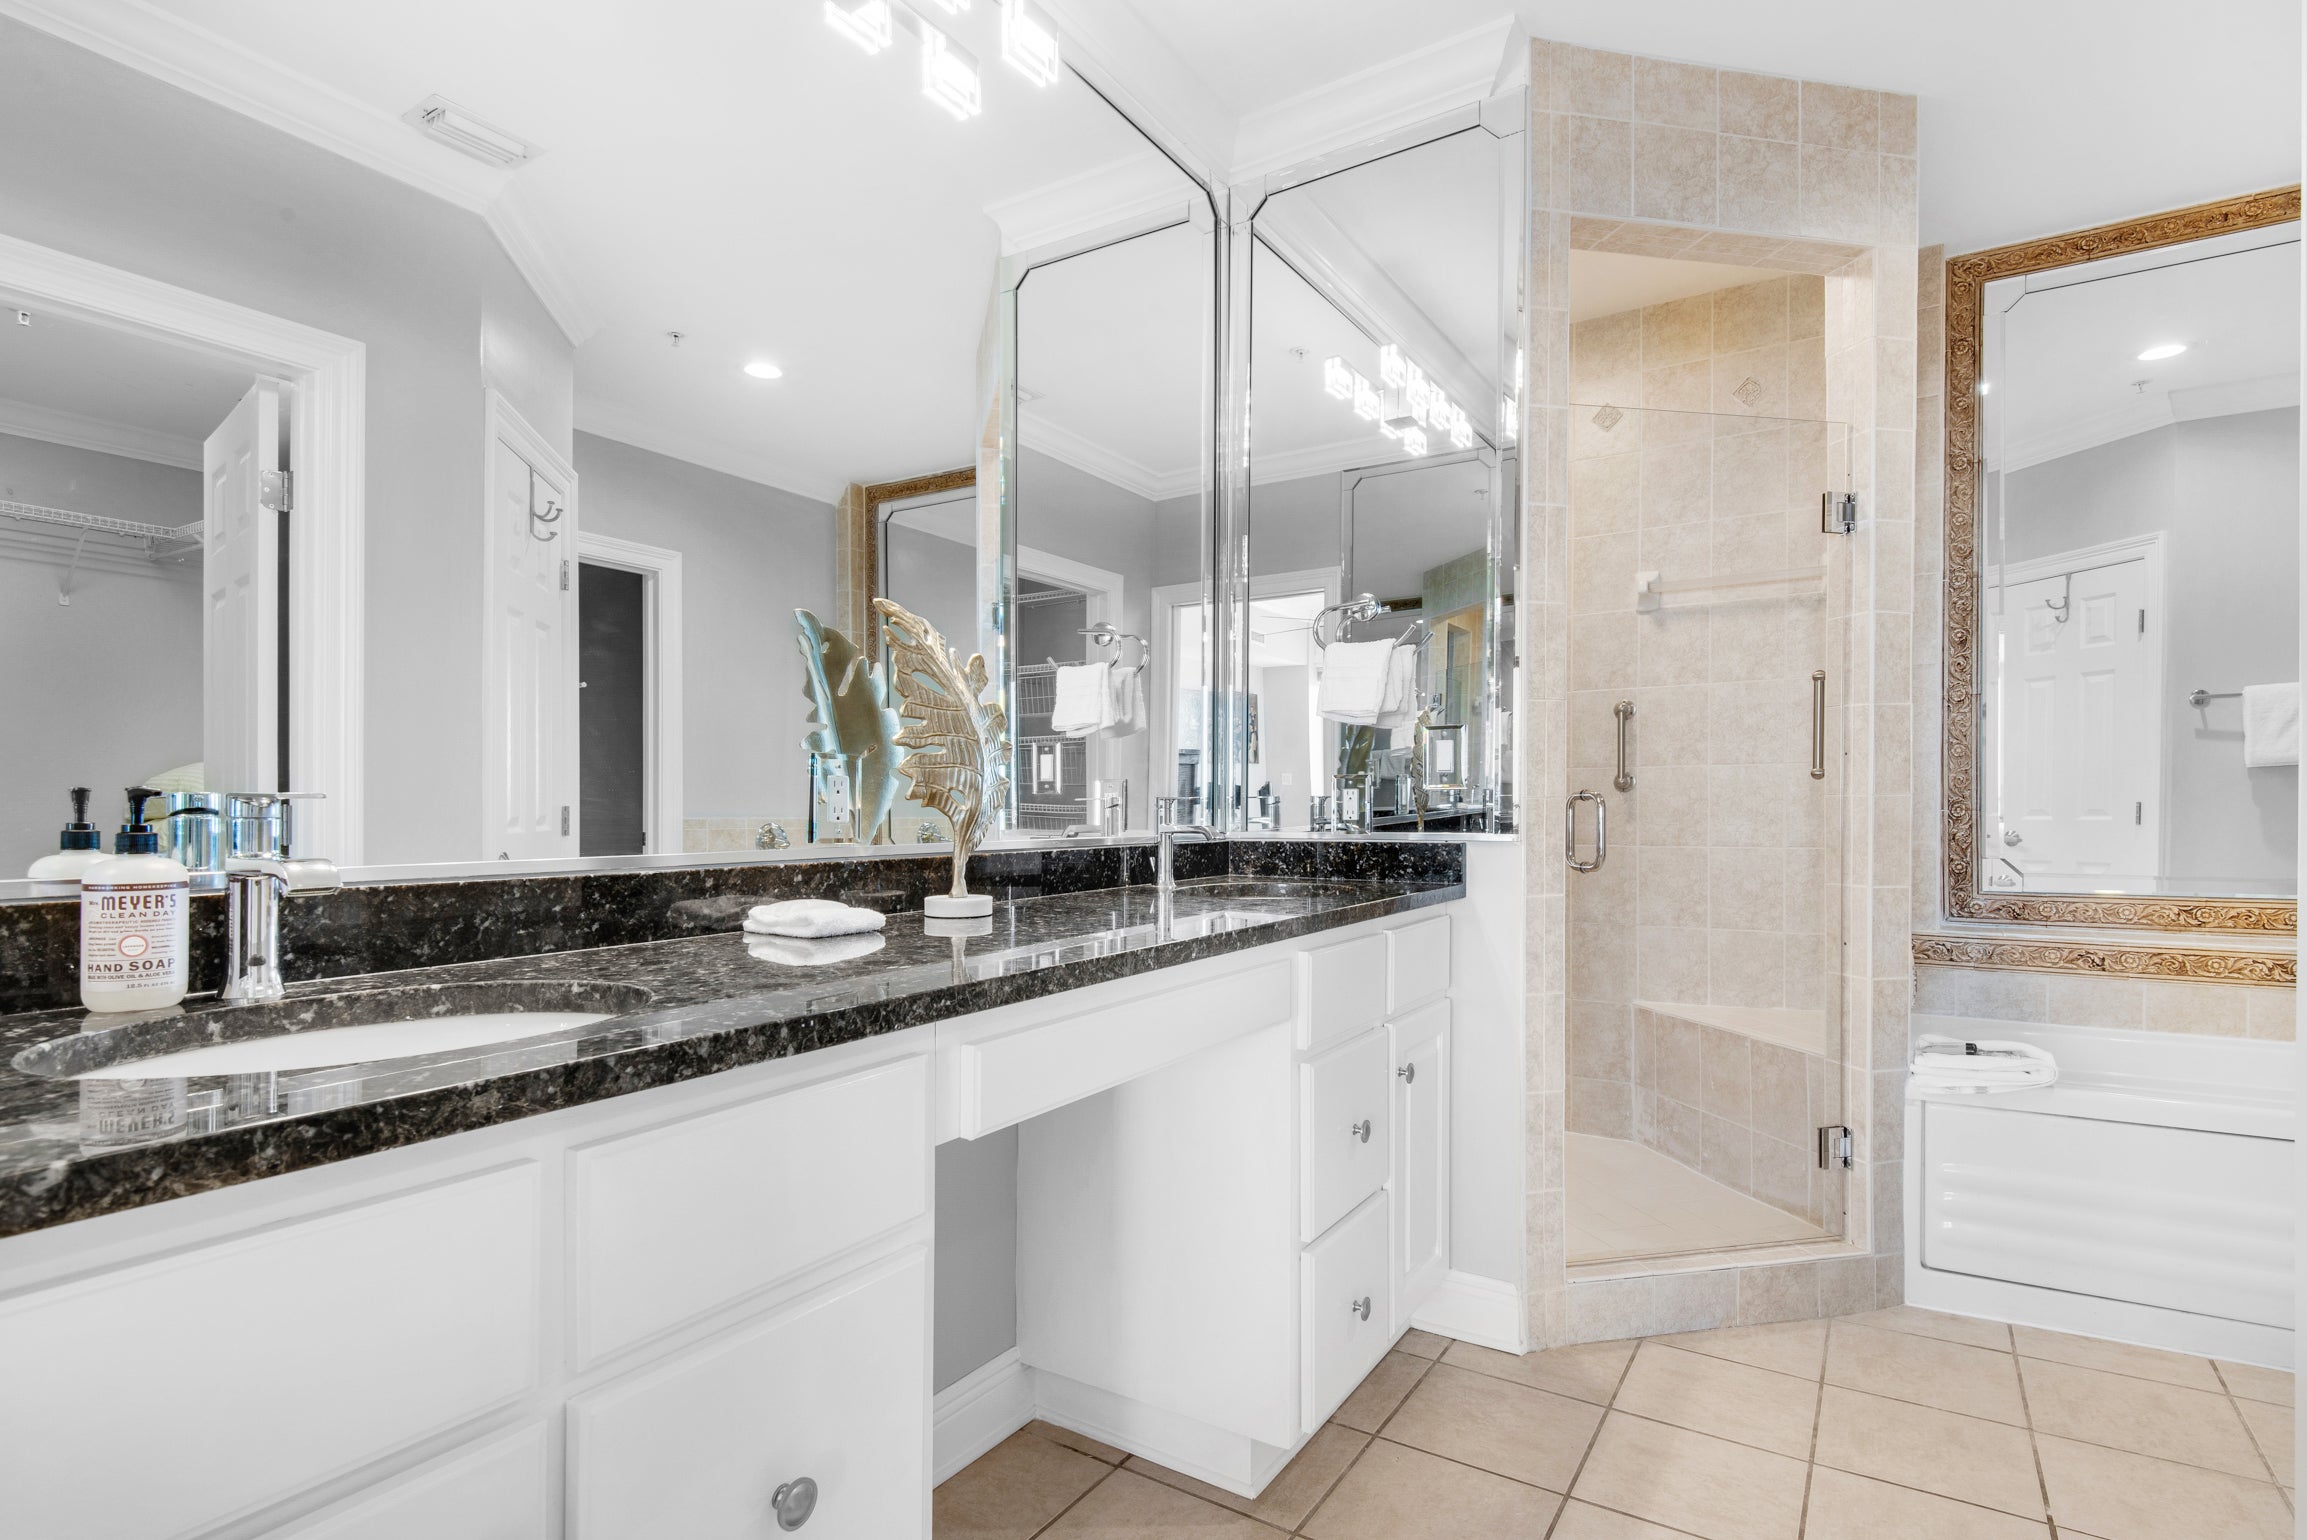 Master bathroom with large walk-in shower